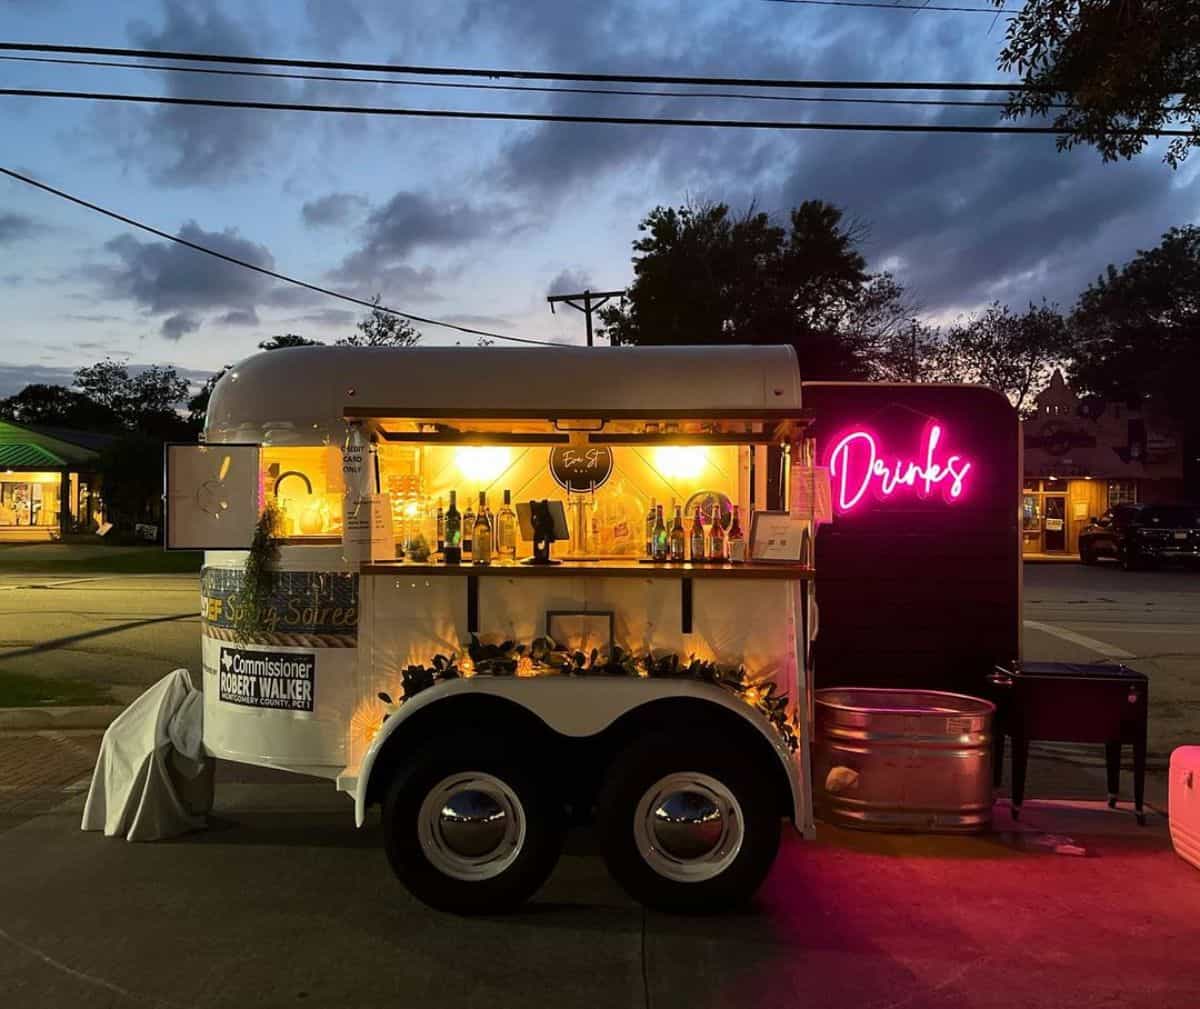 A horse trailer decorated with neon lights rebuilded as a small bar.